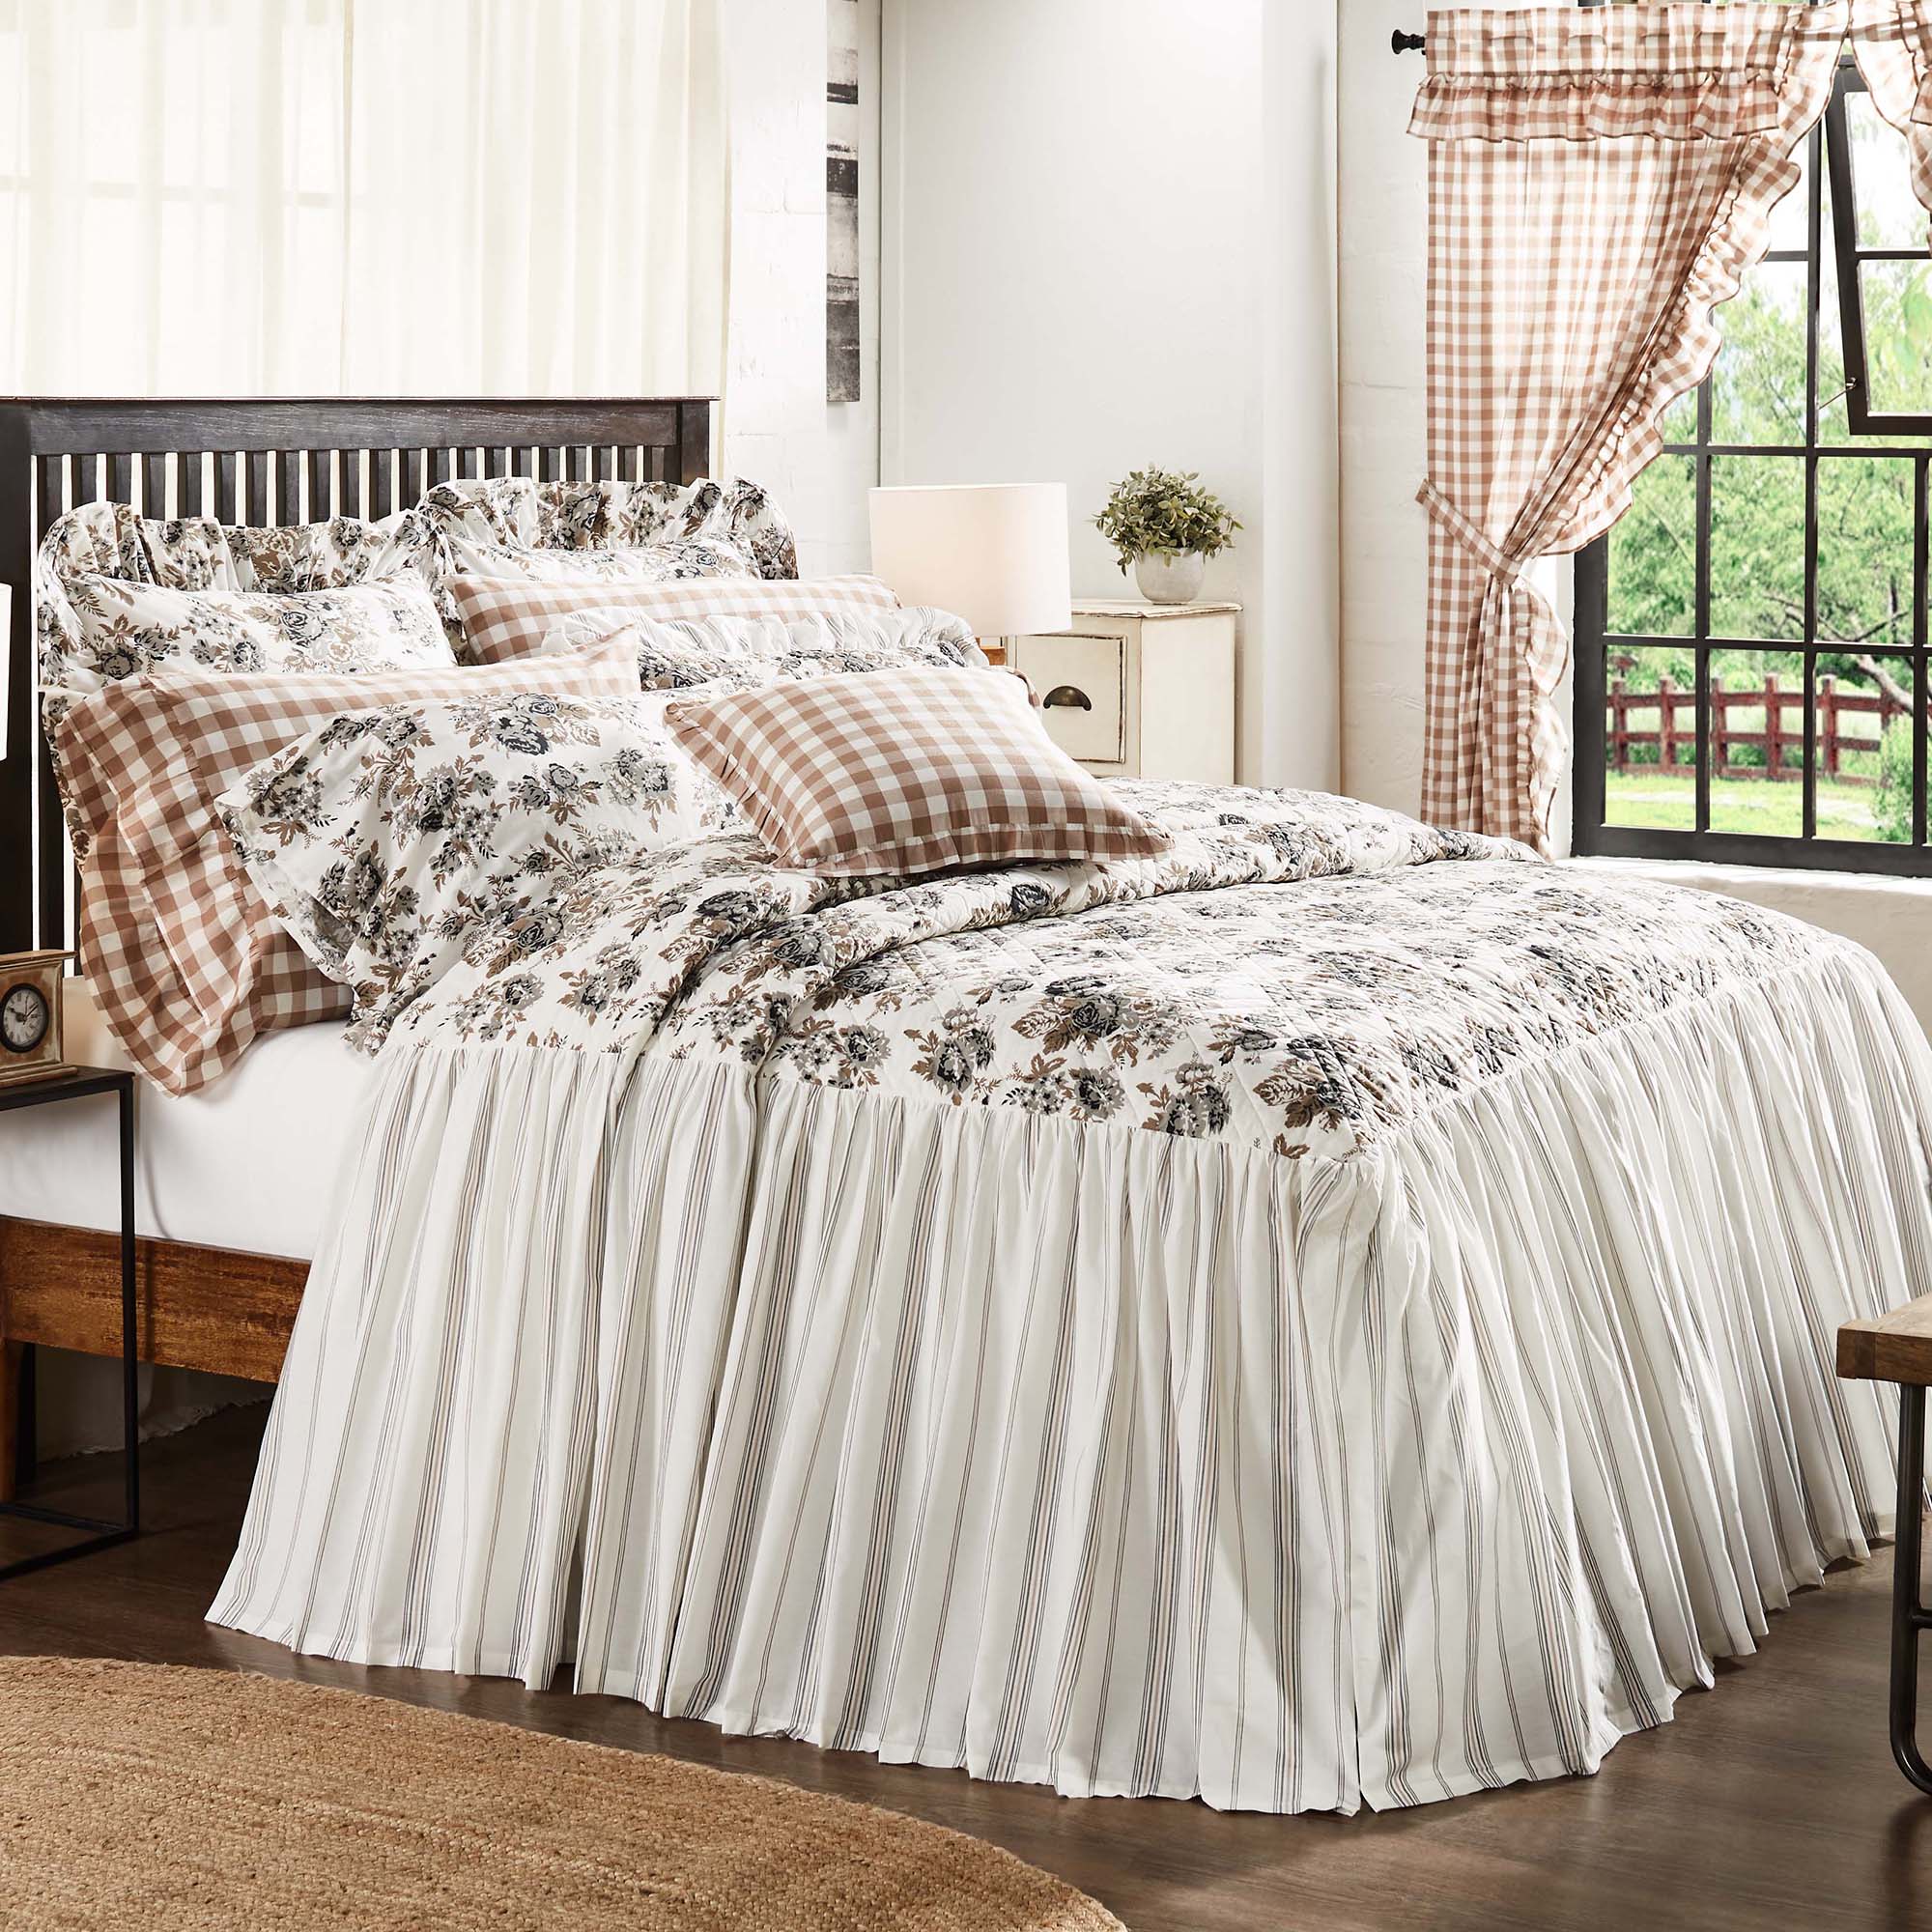 April & Olive Annie Portabella Floral Ruffled Queen Coverlet 80x60+27 By VHC Brands